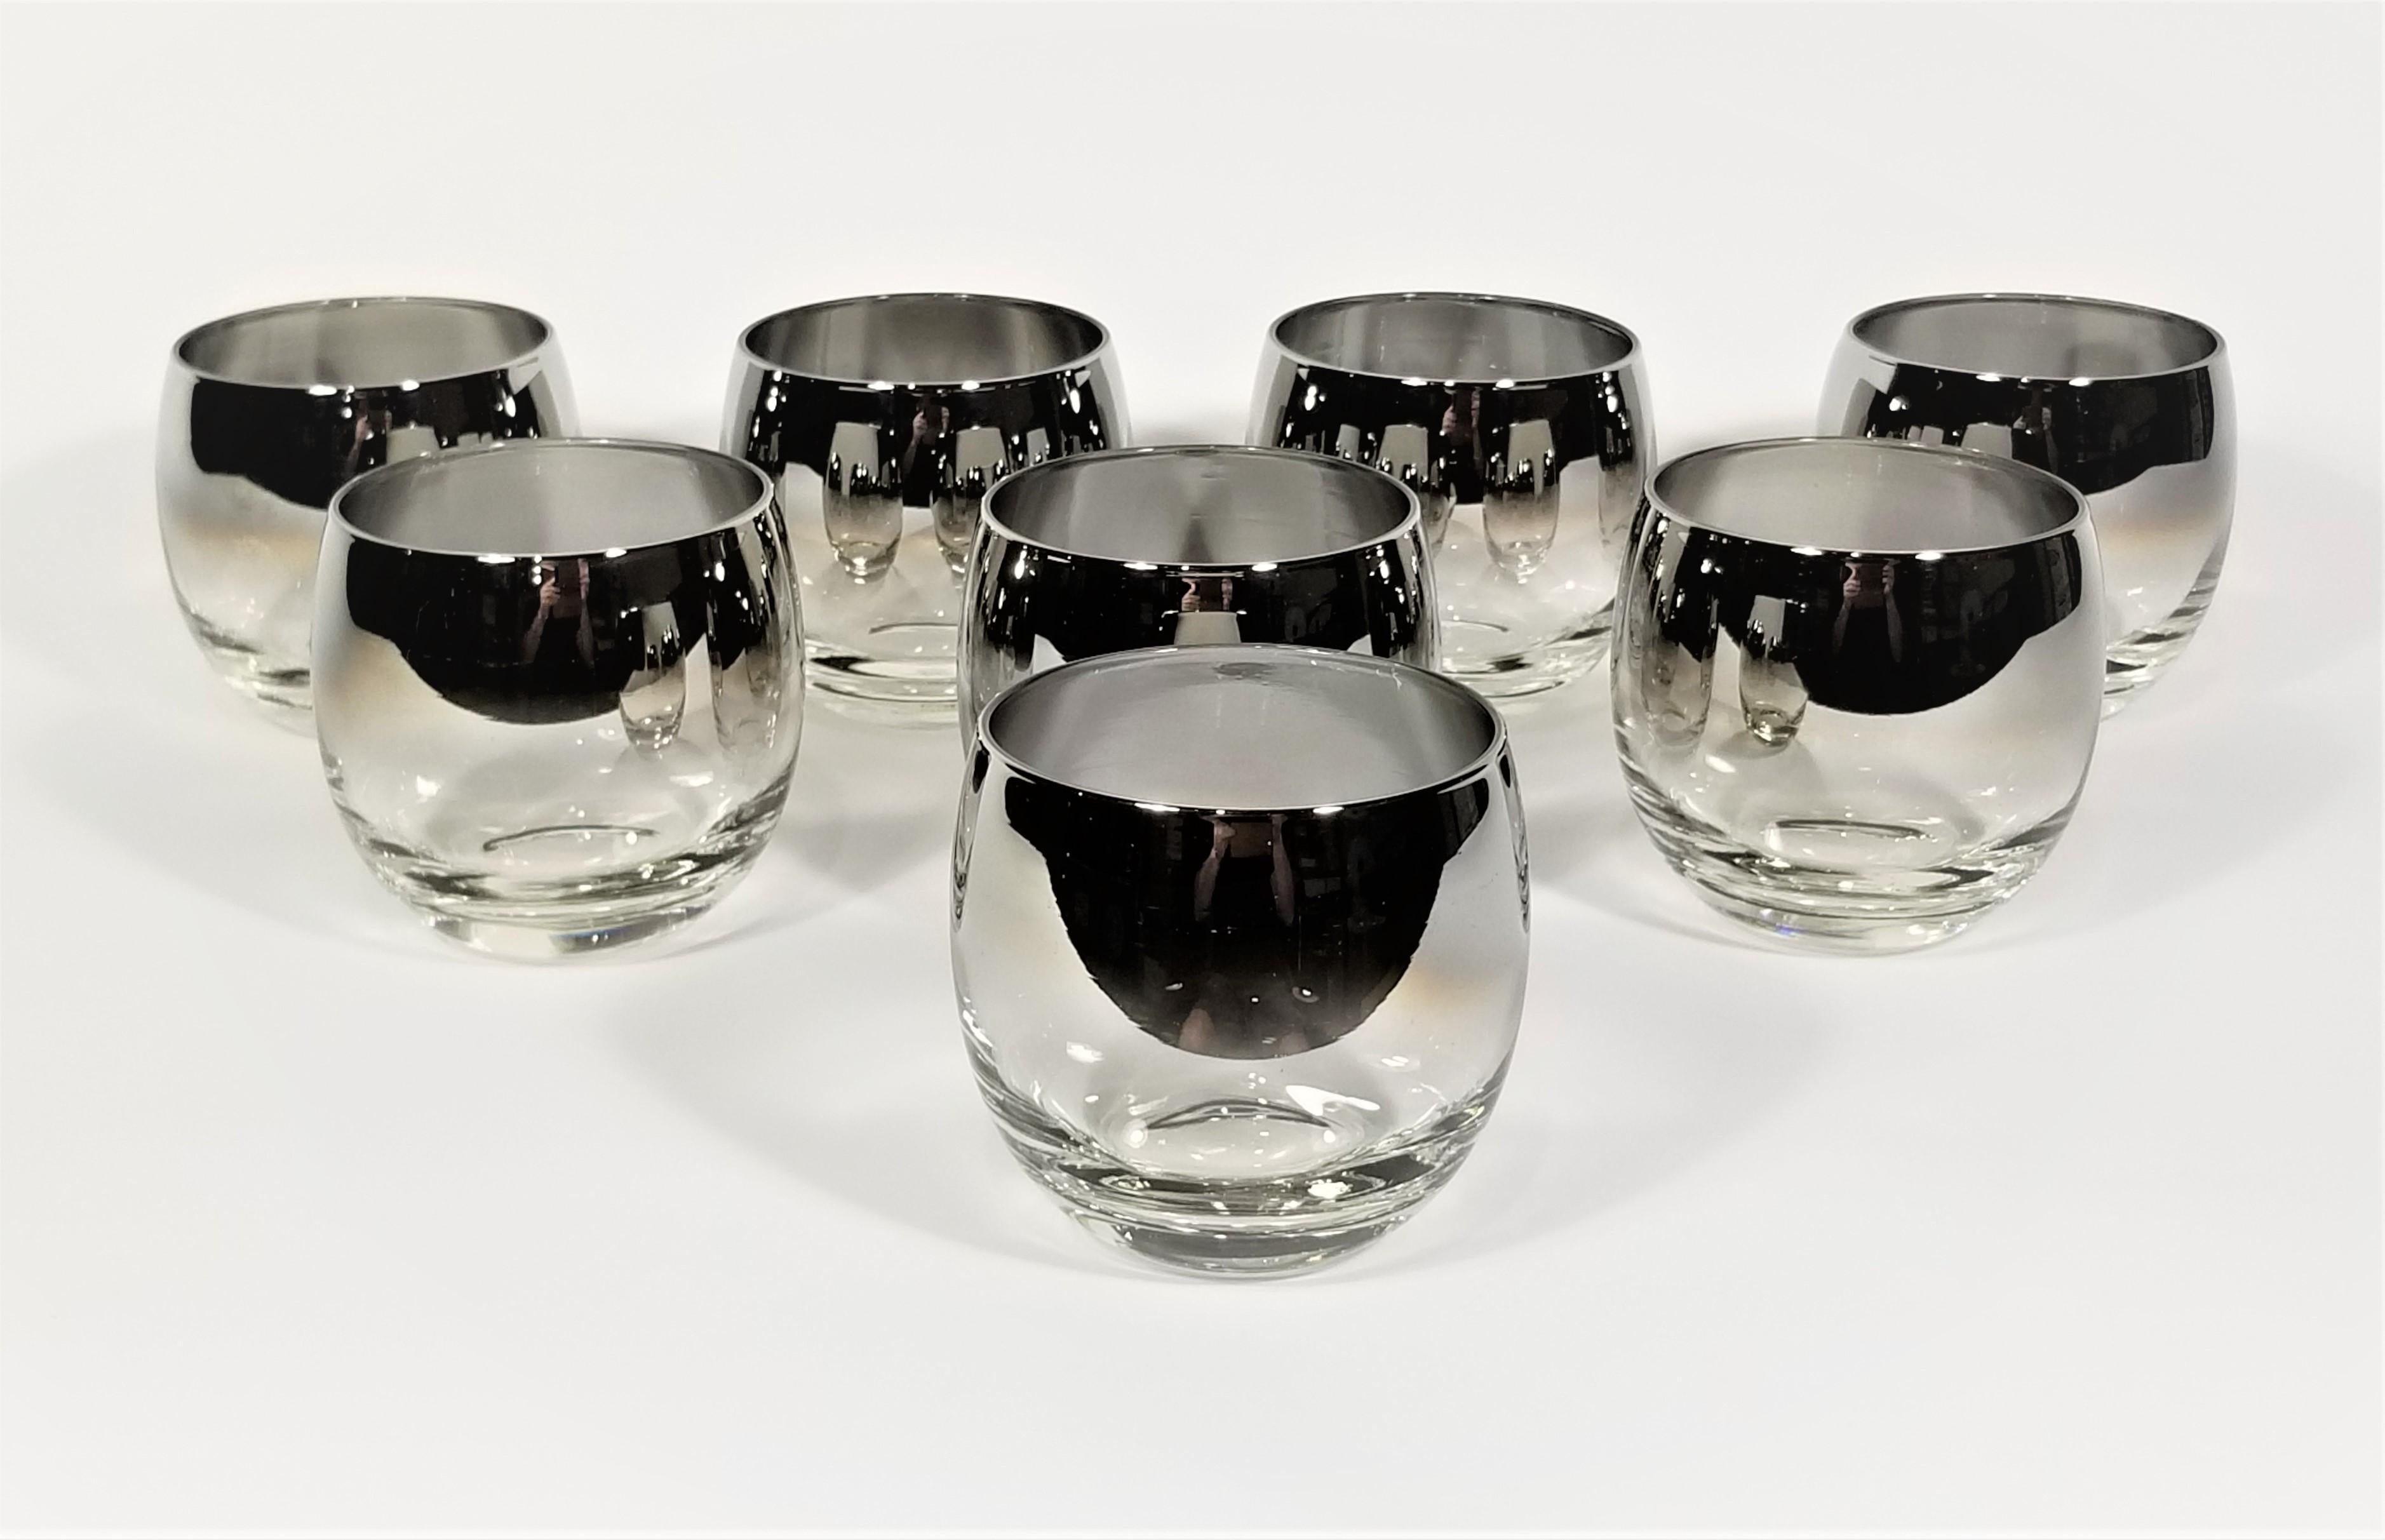 Dorothy Thorpe Roly Poly - 5 For Sale on 1stDibs | dorothy thorpe roly poly  glasses, dorothy thorpe glasses, dorothy thorpe glassware